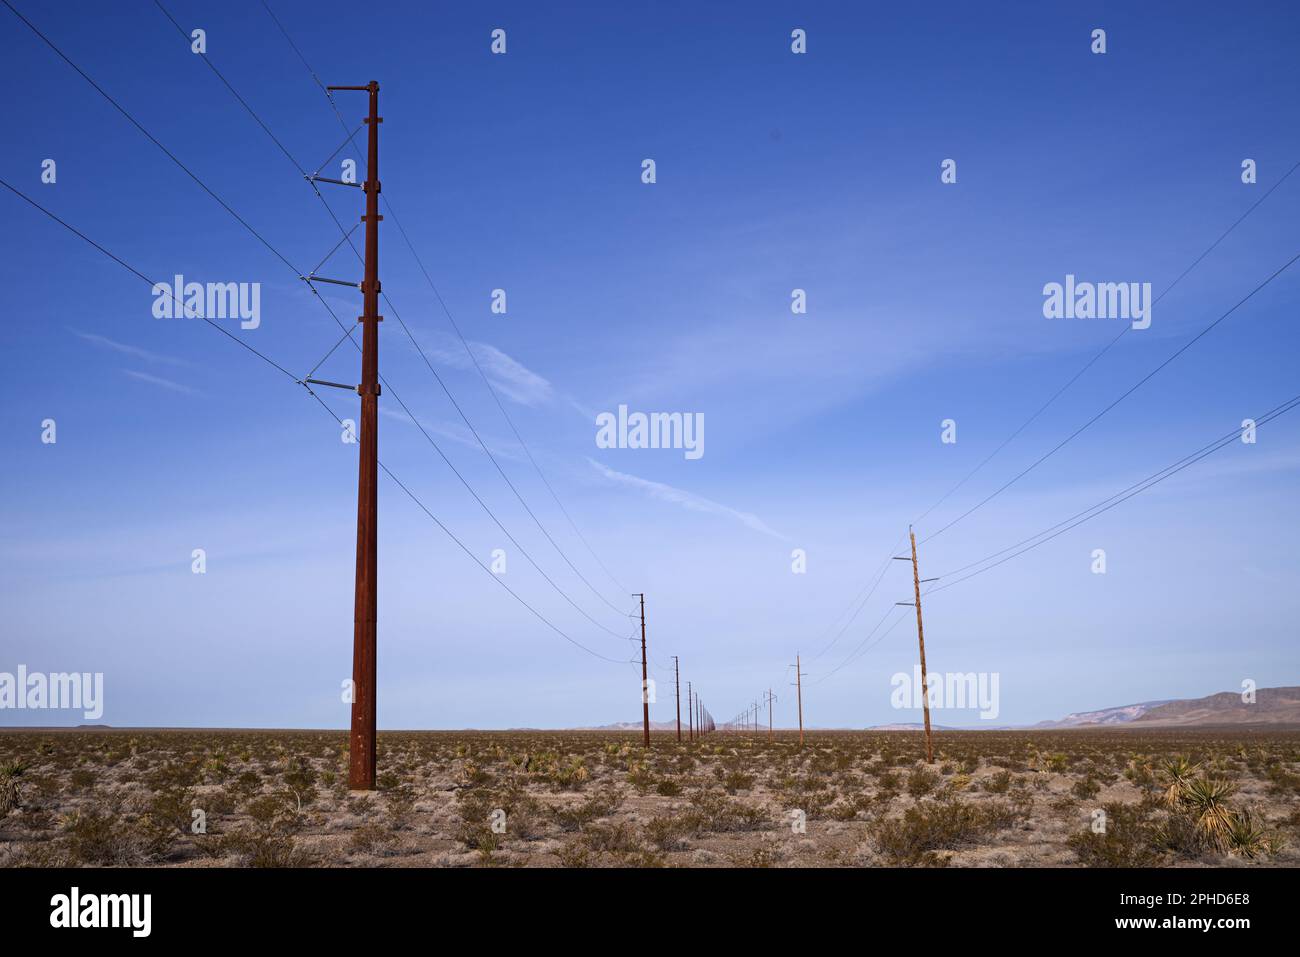 electric power lines in the desert with metal and wood poles Stock Photo